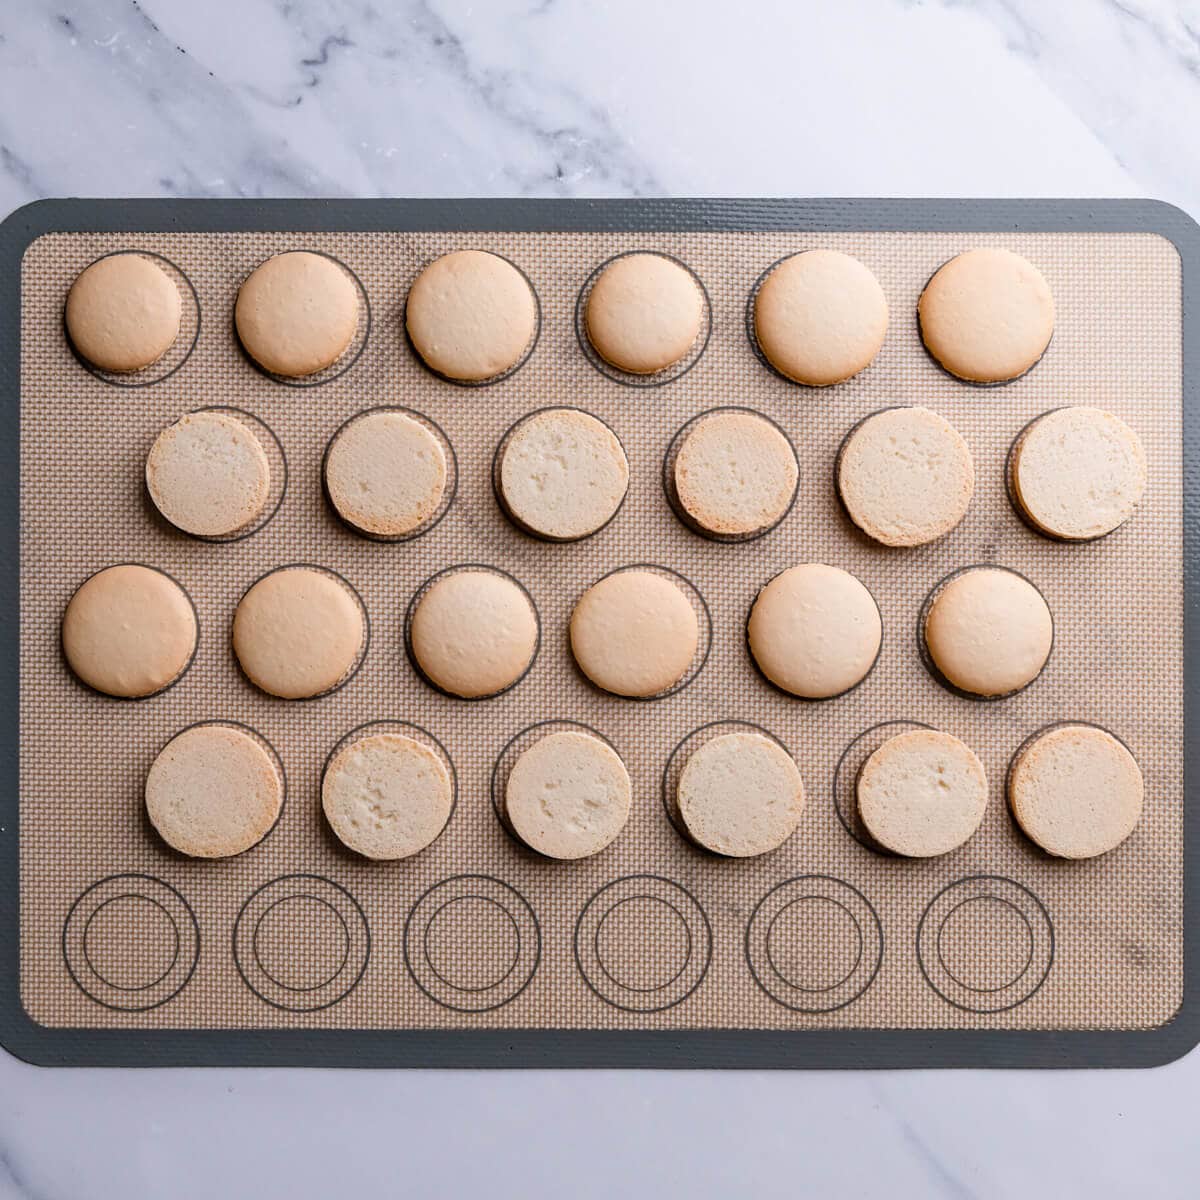 baked macaron top and bottom shells on a silicone baking mat.